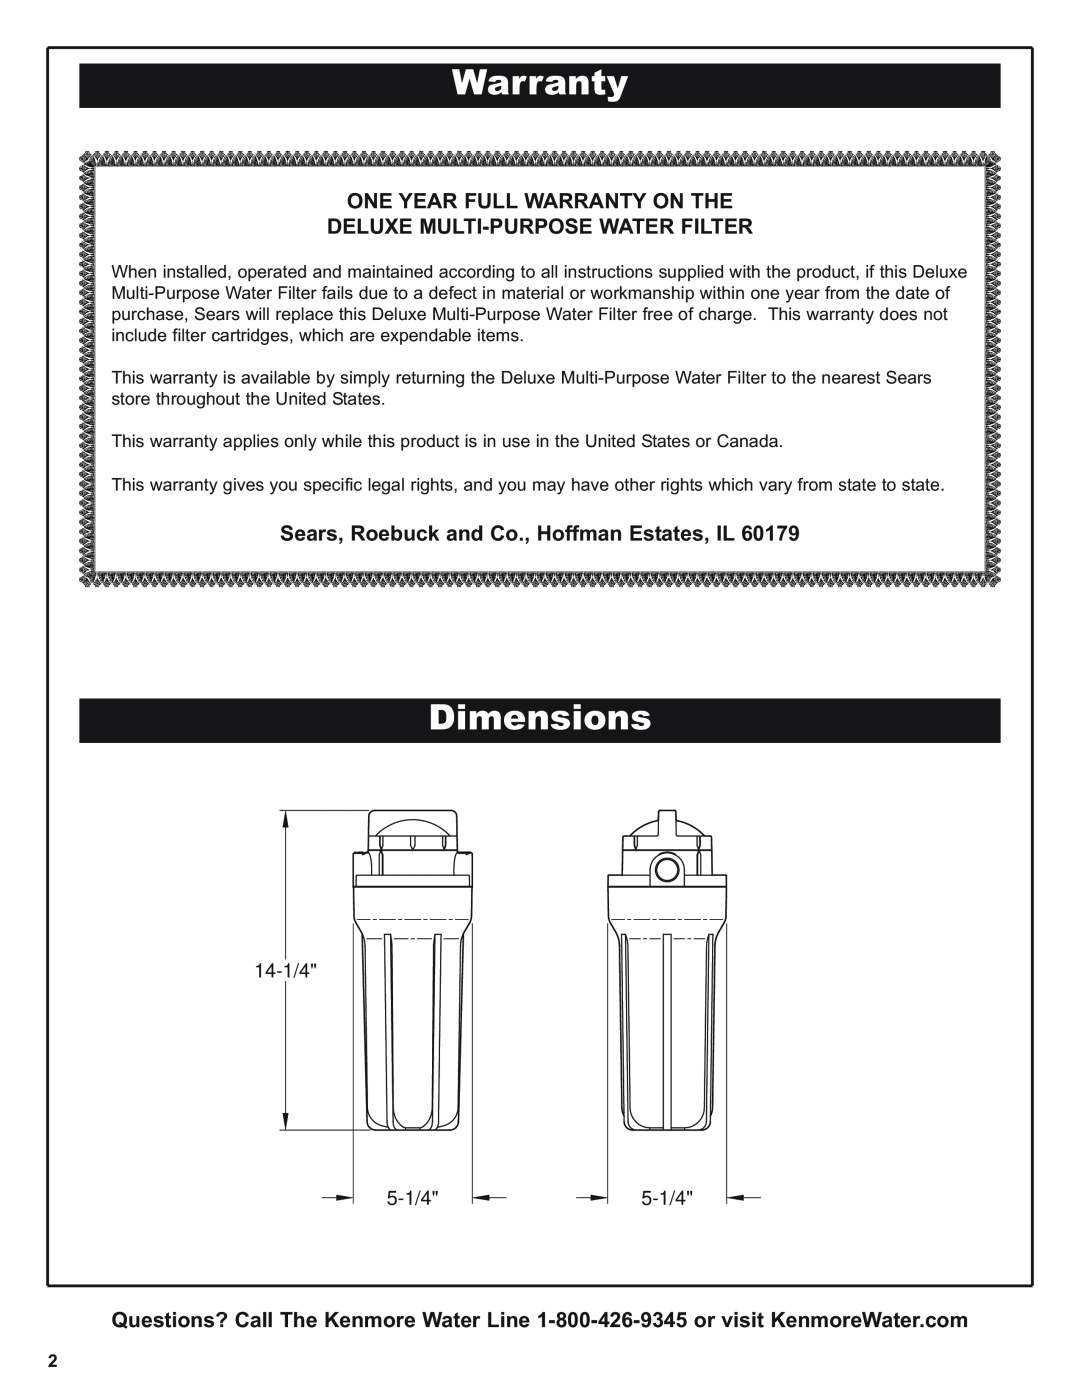 Kenmore 625.38445 Dimensions, One Year Full Warranty On The Deluxe Multi-Purpose Water Filter, 14-1/4 5-1/4 